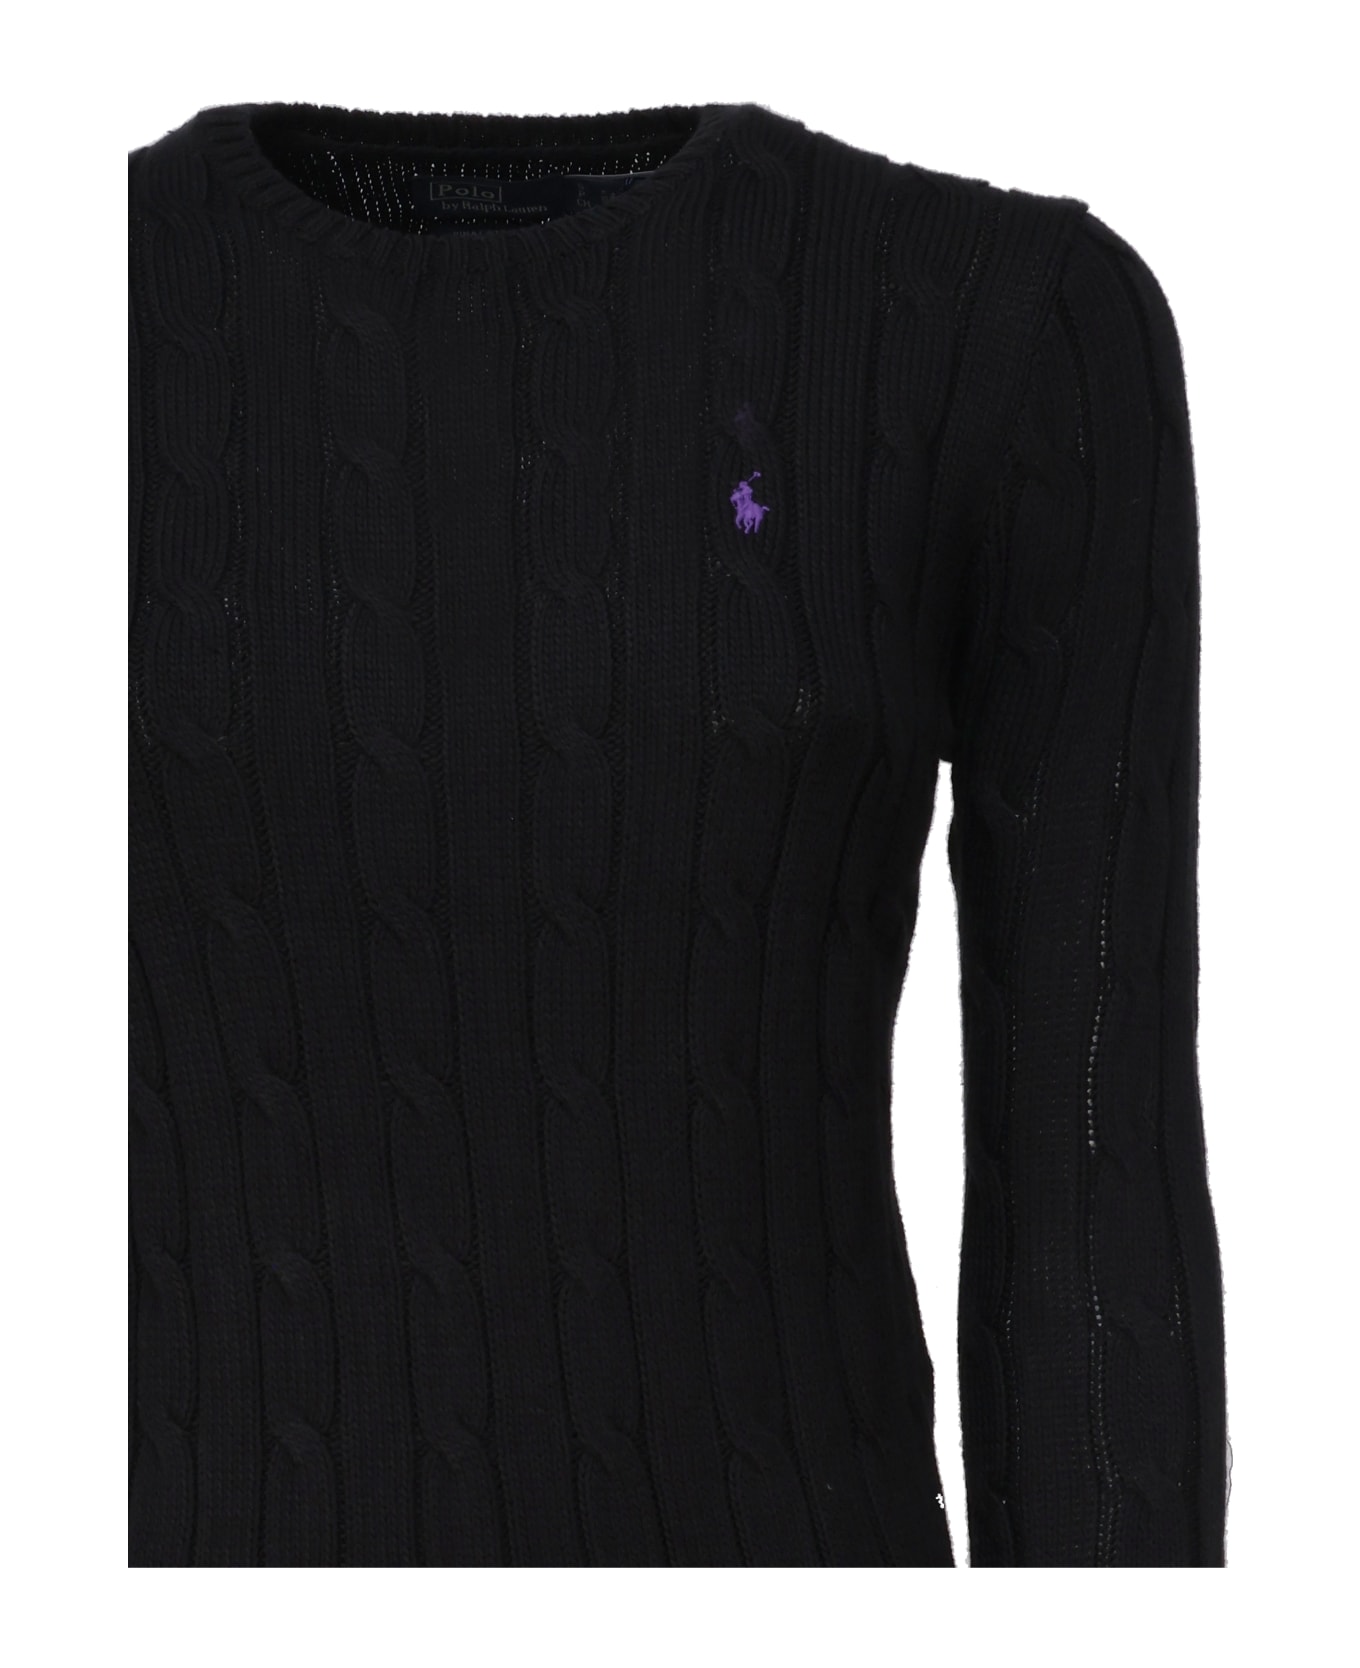 Polo Ralph Lauren Top With Embroidery - Black